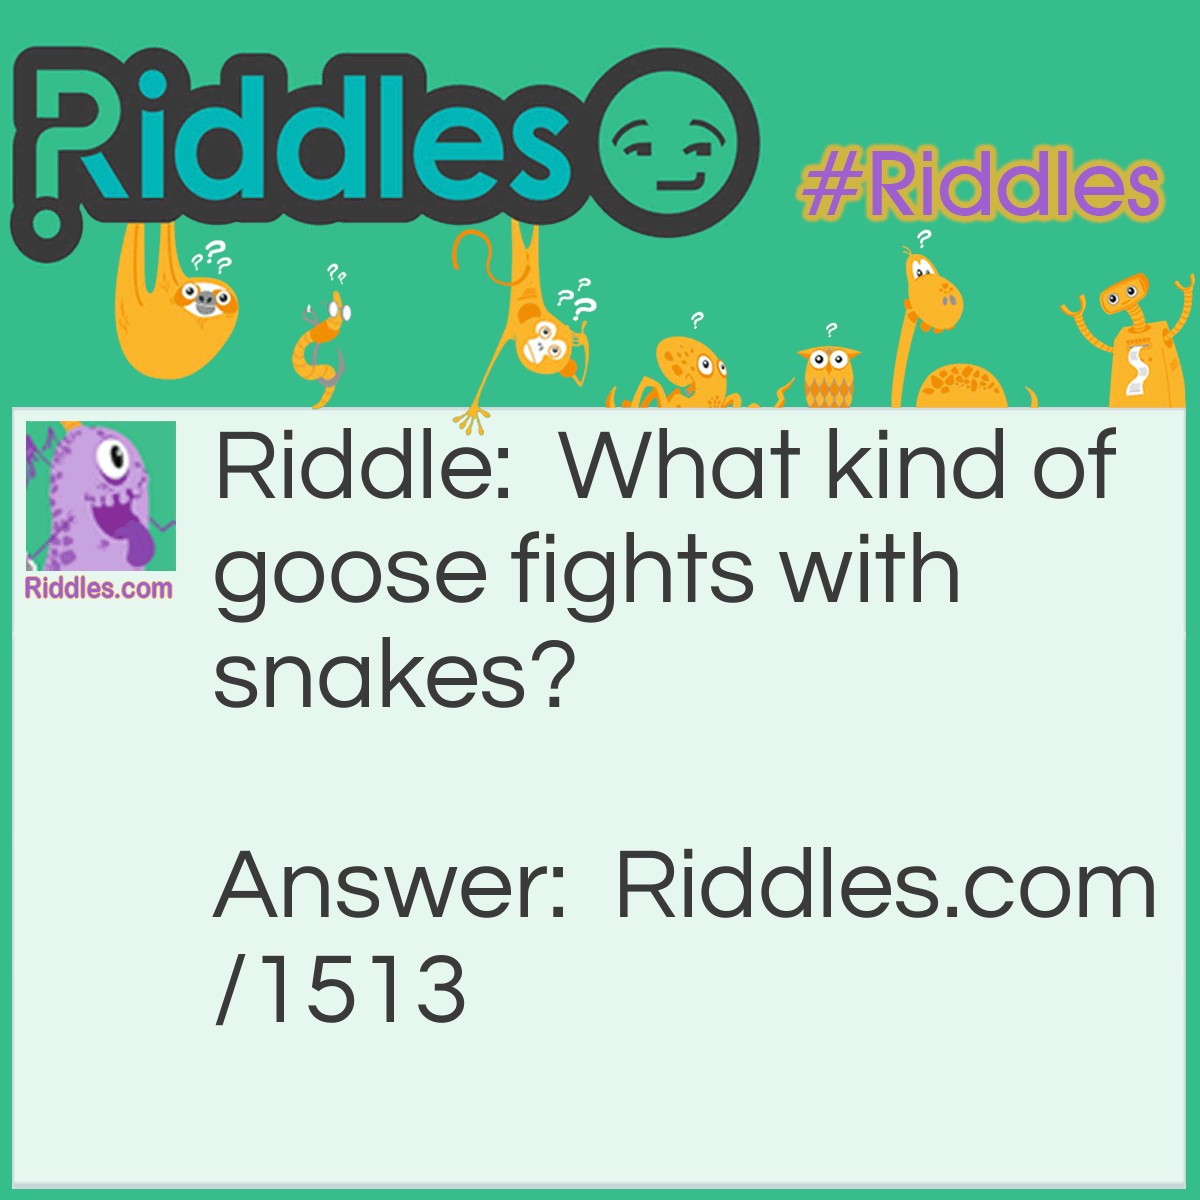 Riddle: What kind of goose fights with snakes? Answer: A mongoose.